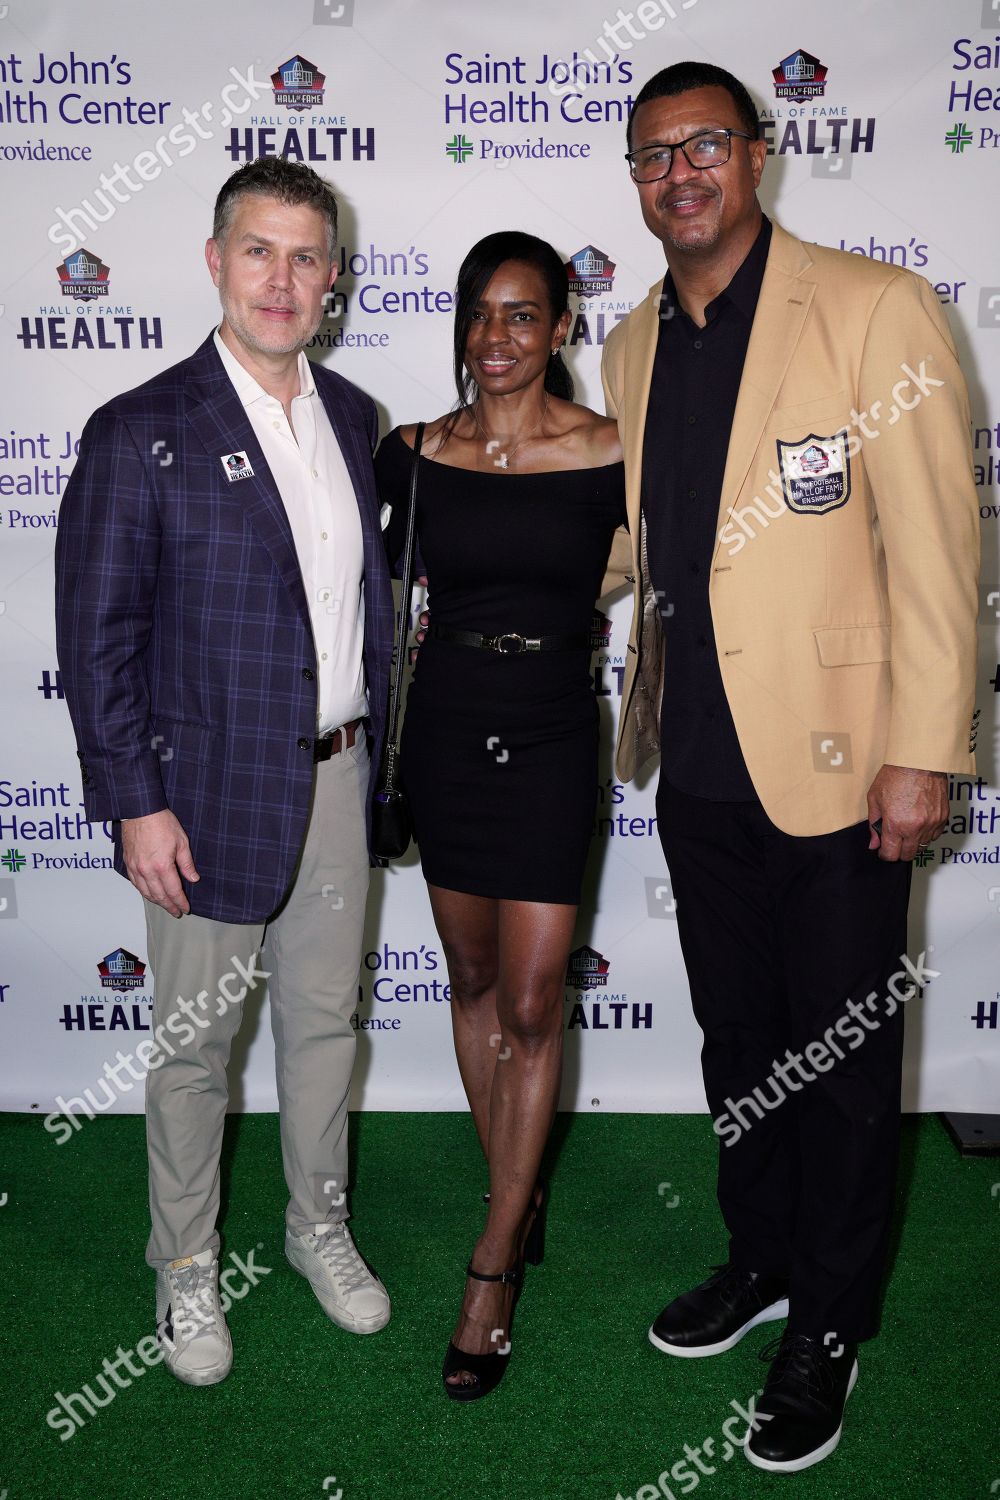 Ryan Cain Steve Atwater Wife Attend Editorial Stock Photo - Stock Image